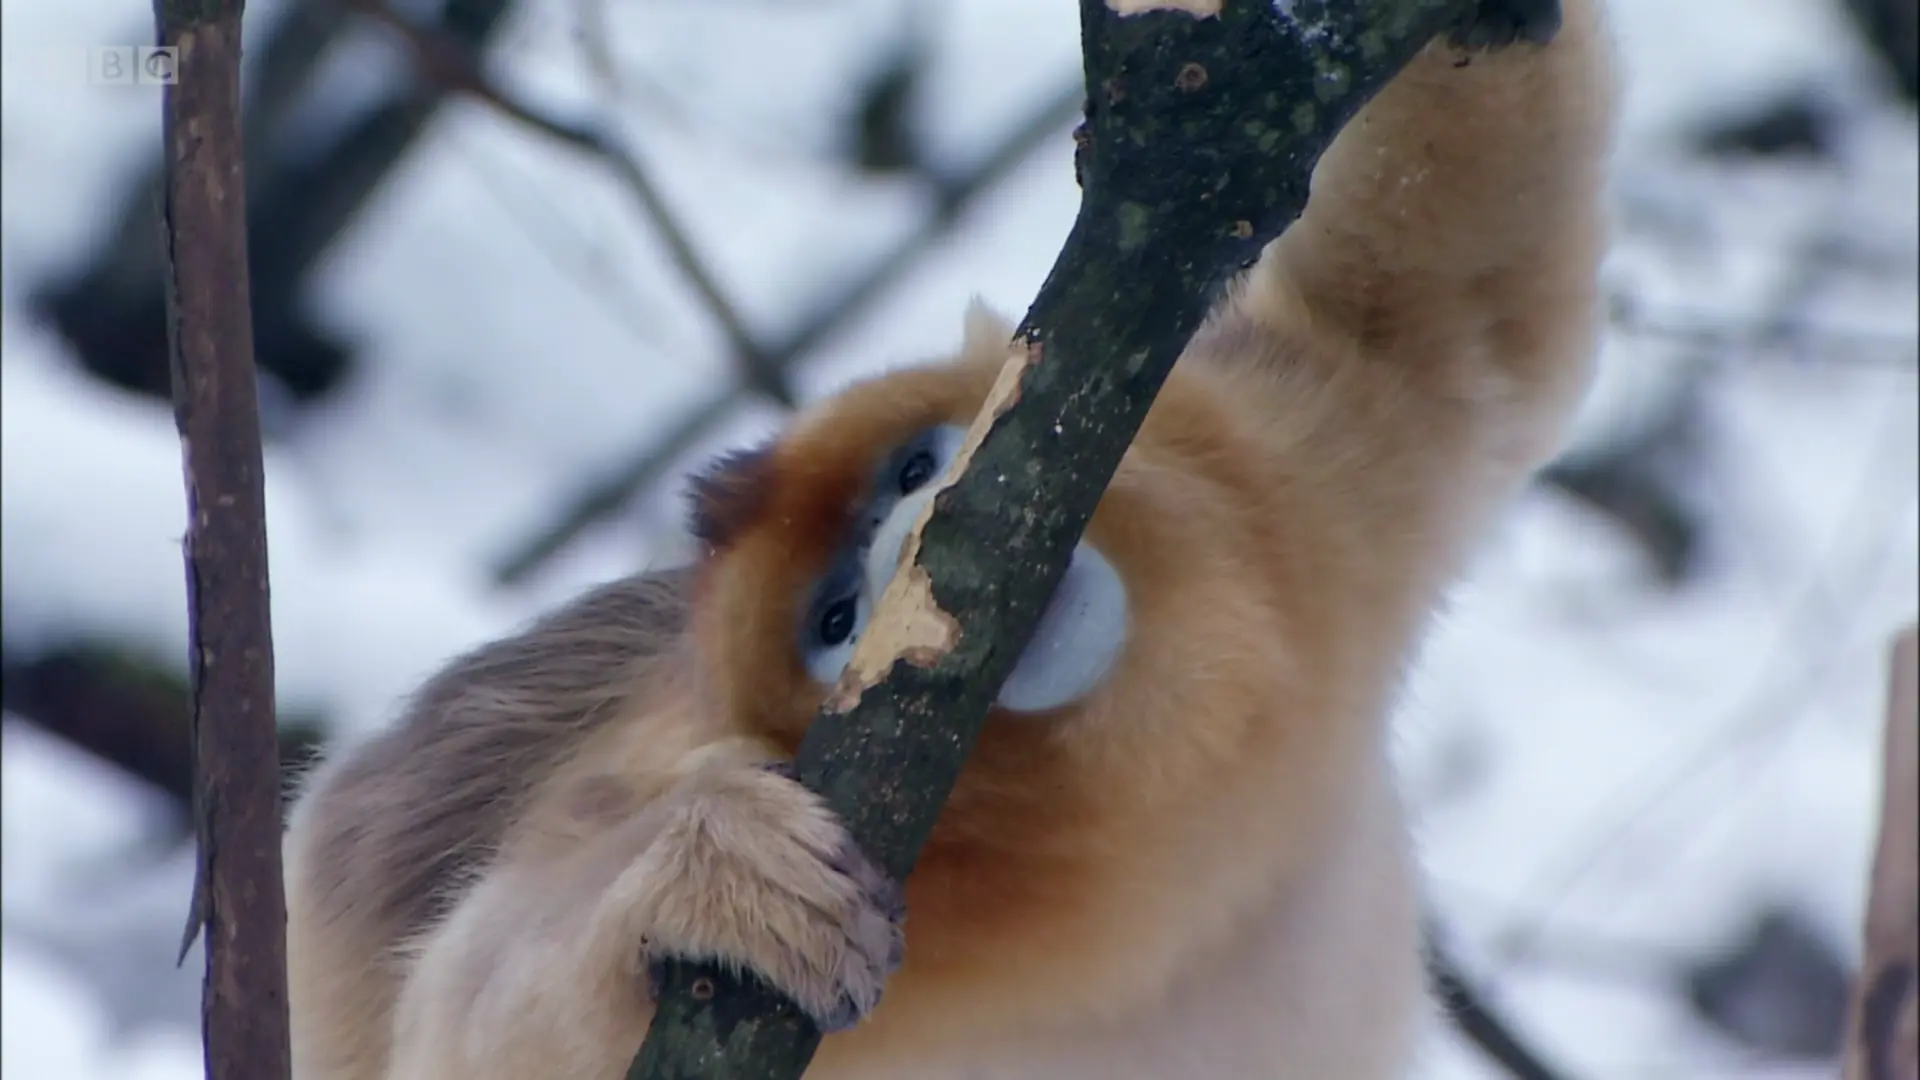 Qinling golden snub-nosed monkey (Rhinopithecus roxellana qinlingensis) as shown in Planet Earth - Mountains